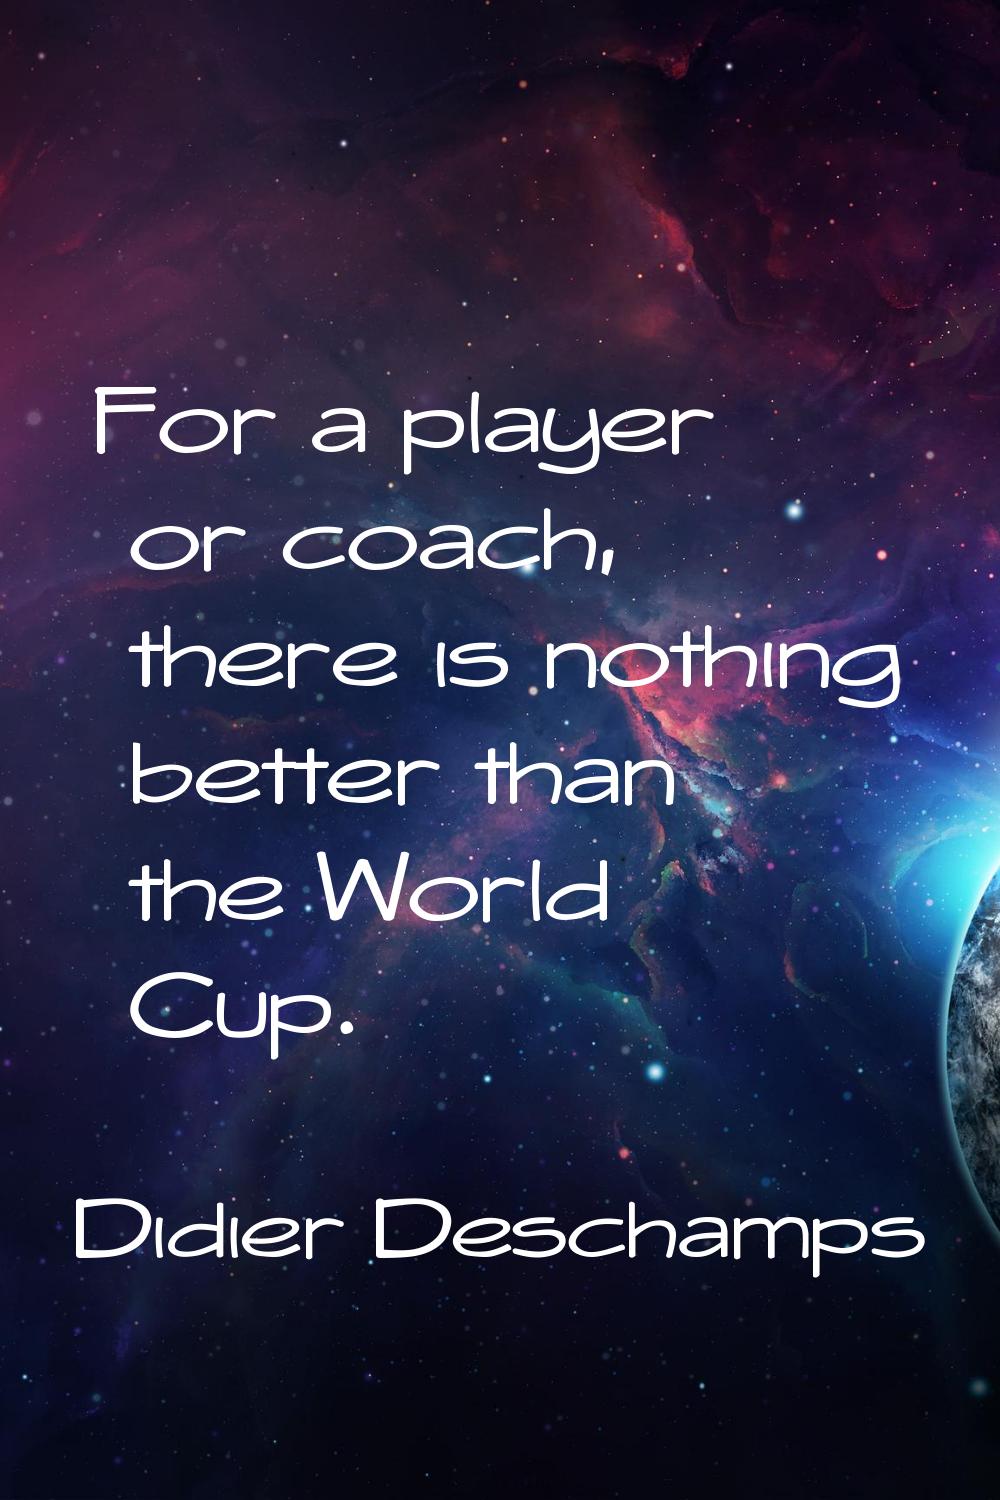 For a player or coach, there is nothing better than the World Cup.